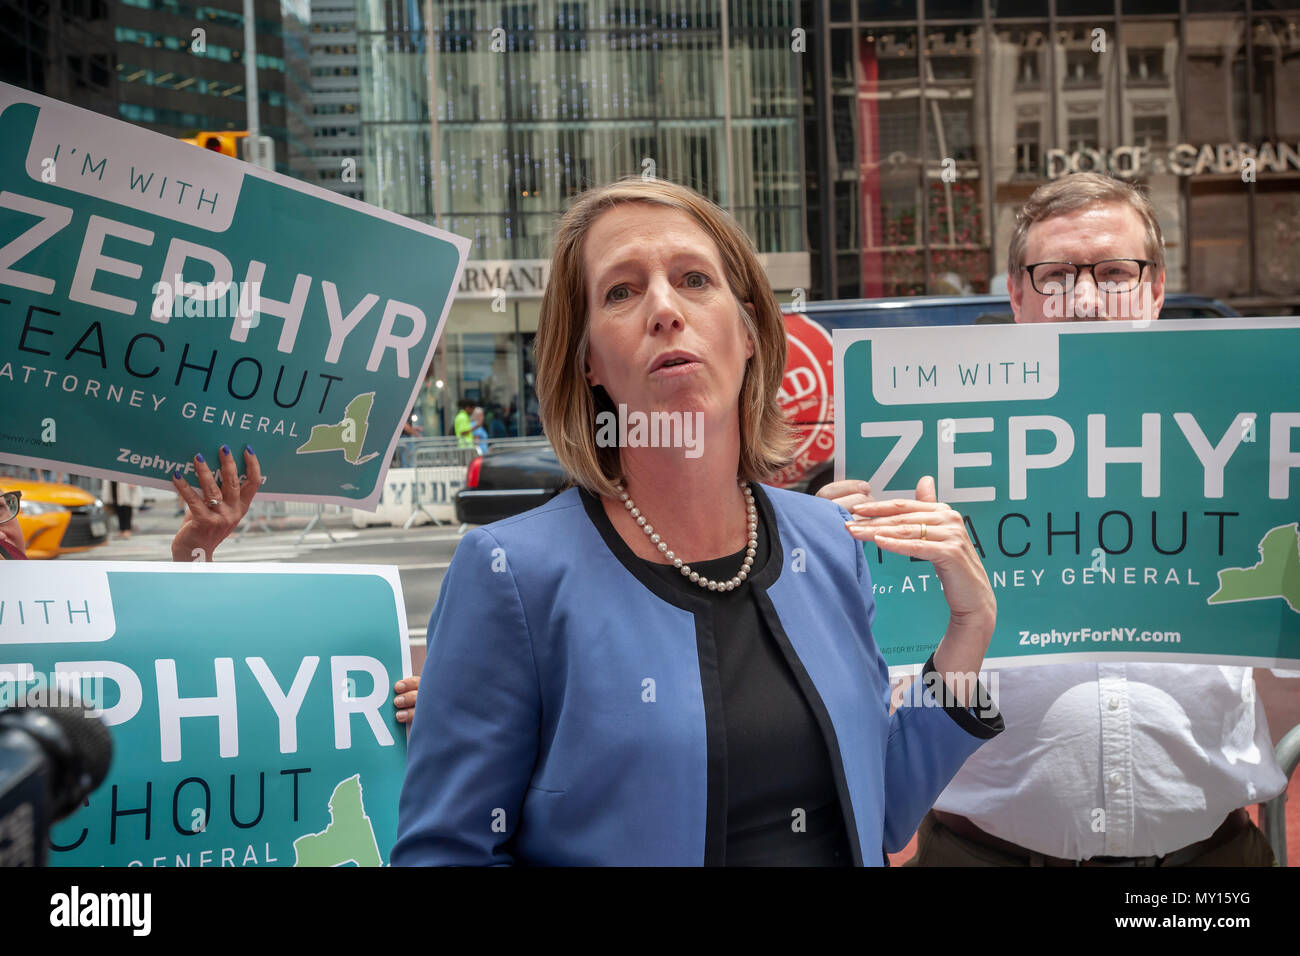 New York, USA. 5th June, 2018. Standing on Fifth avenue by Trump Tower Democratic NYS Zephyr Teachout joins supporters on Tuesday, June 5, 2018 as she announces that she is joining the field and running for New York State Attorney General, replacing disgraced Eric Schneiderman who resigned. Teachout made the announcement on the first day of petitioning, which she has to do to get on the ballot having not received 25% of the delegates' votes at the recent Democratic State Convention. (Â© Richard B. Levine) Credit: Richard Levine/Alamy Live News Stock Photo